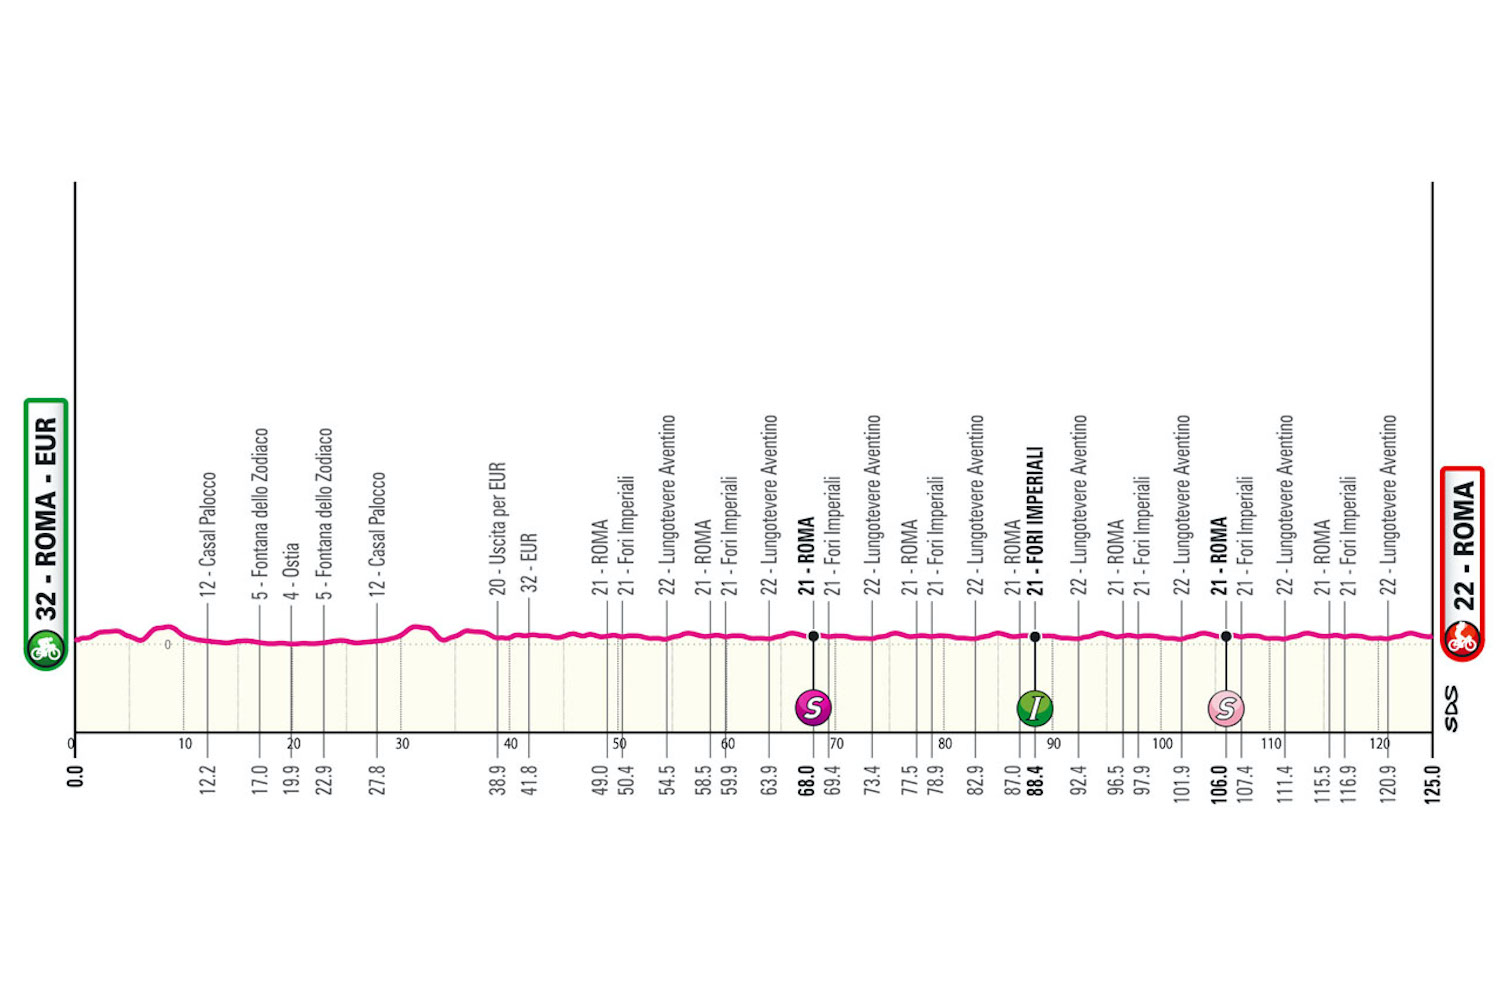 The profile for stage 21 of the Giro d'Italia.